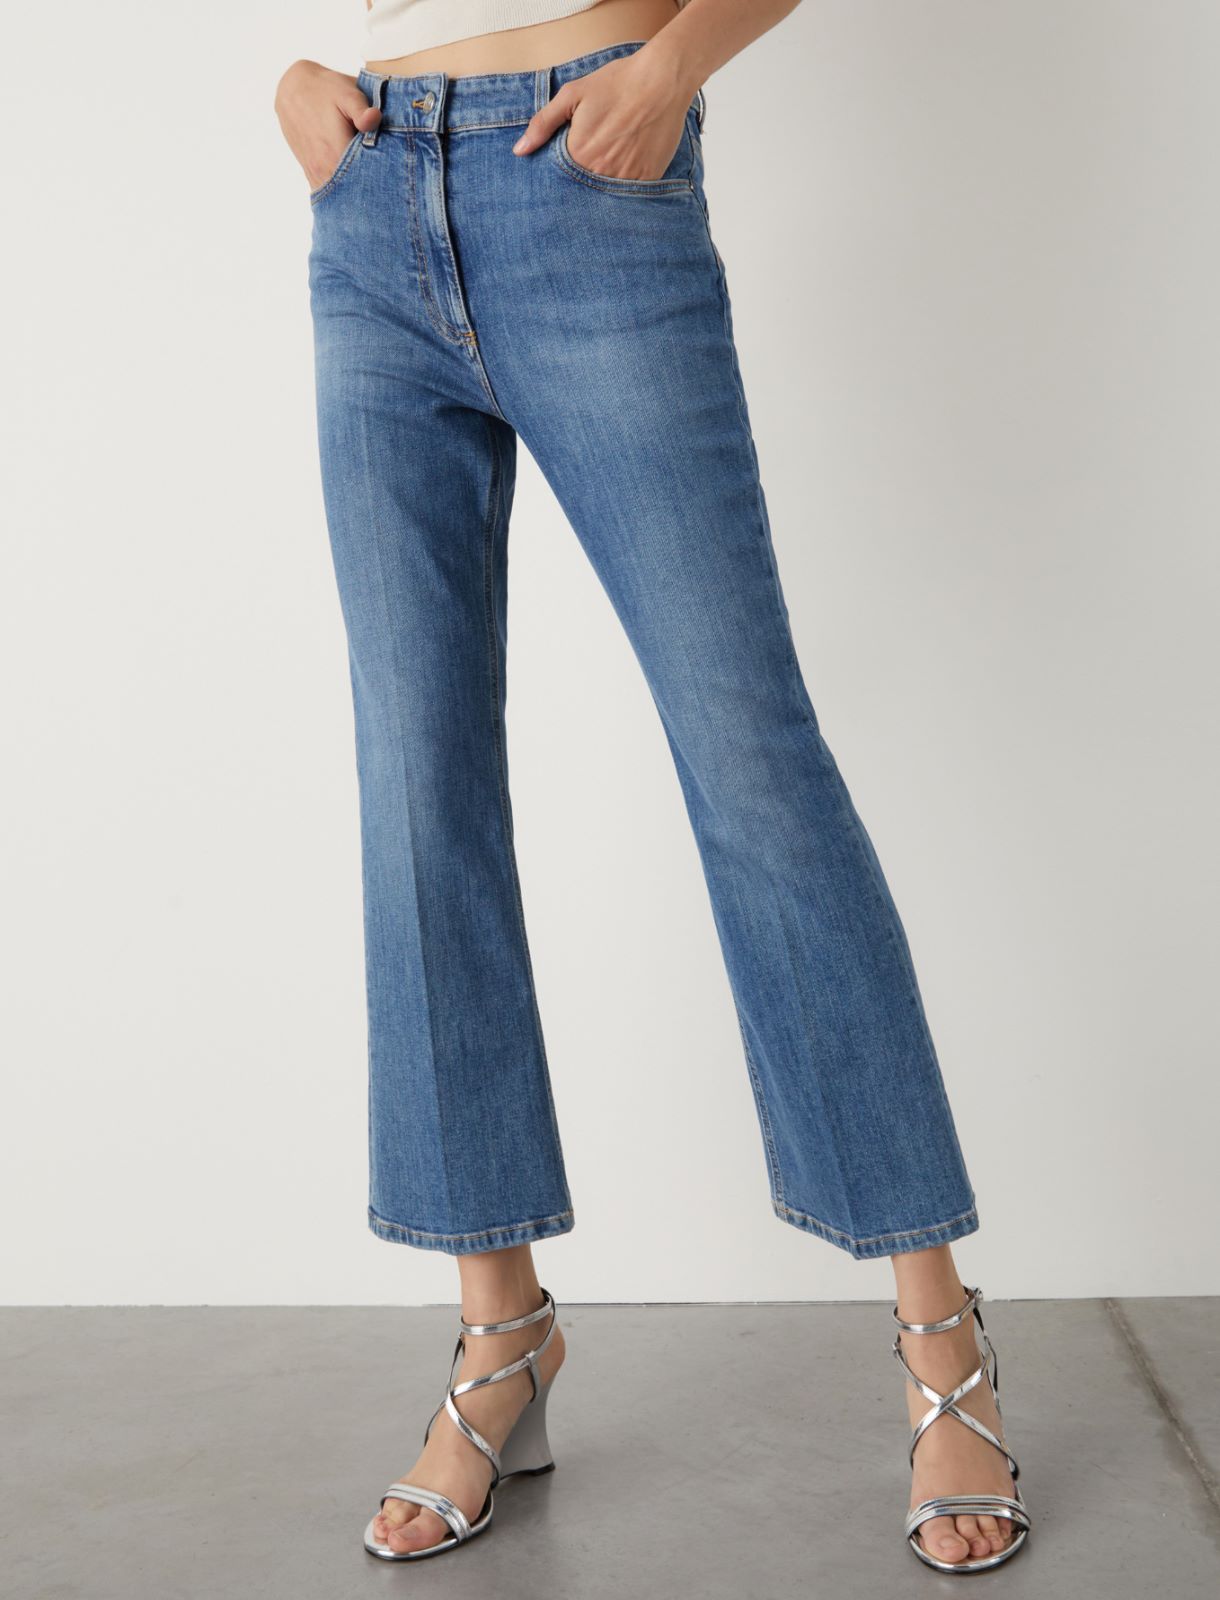 Jeans flare - Blue jeans - Marella